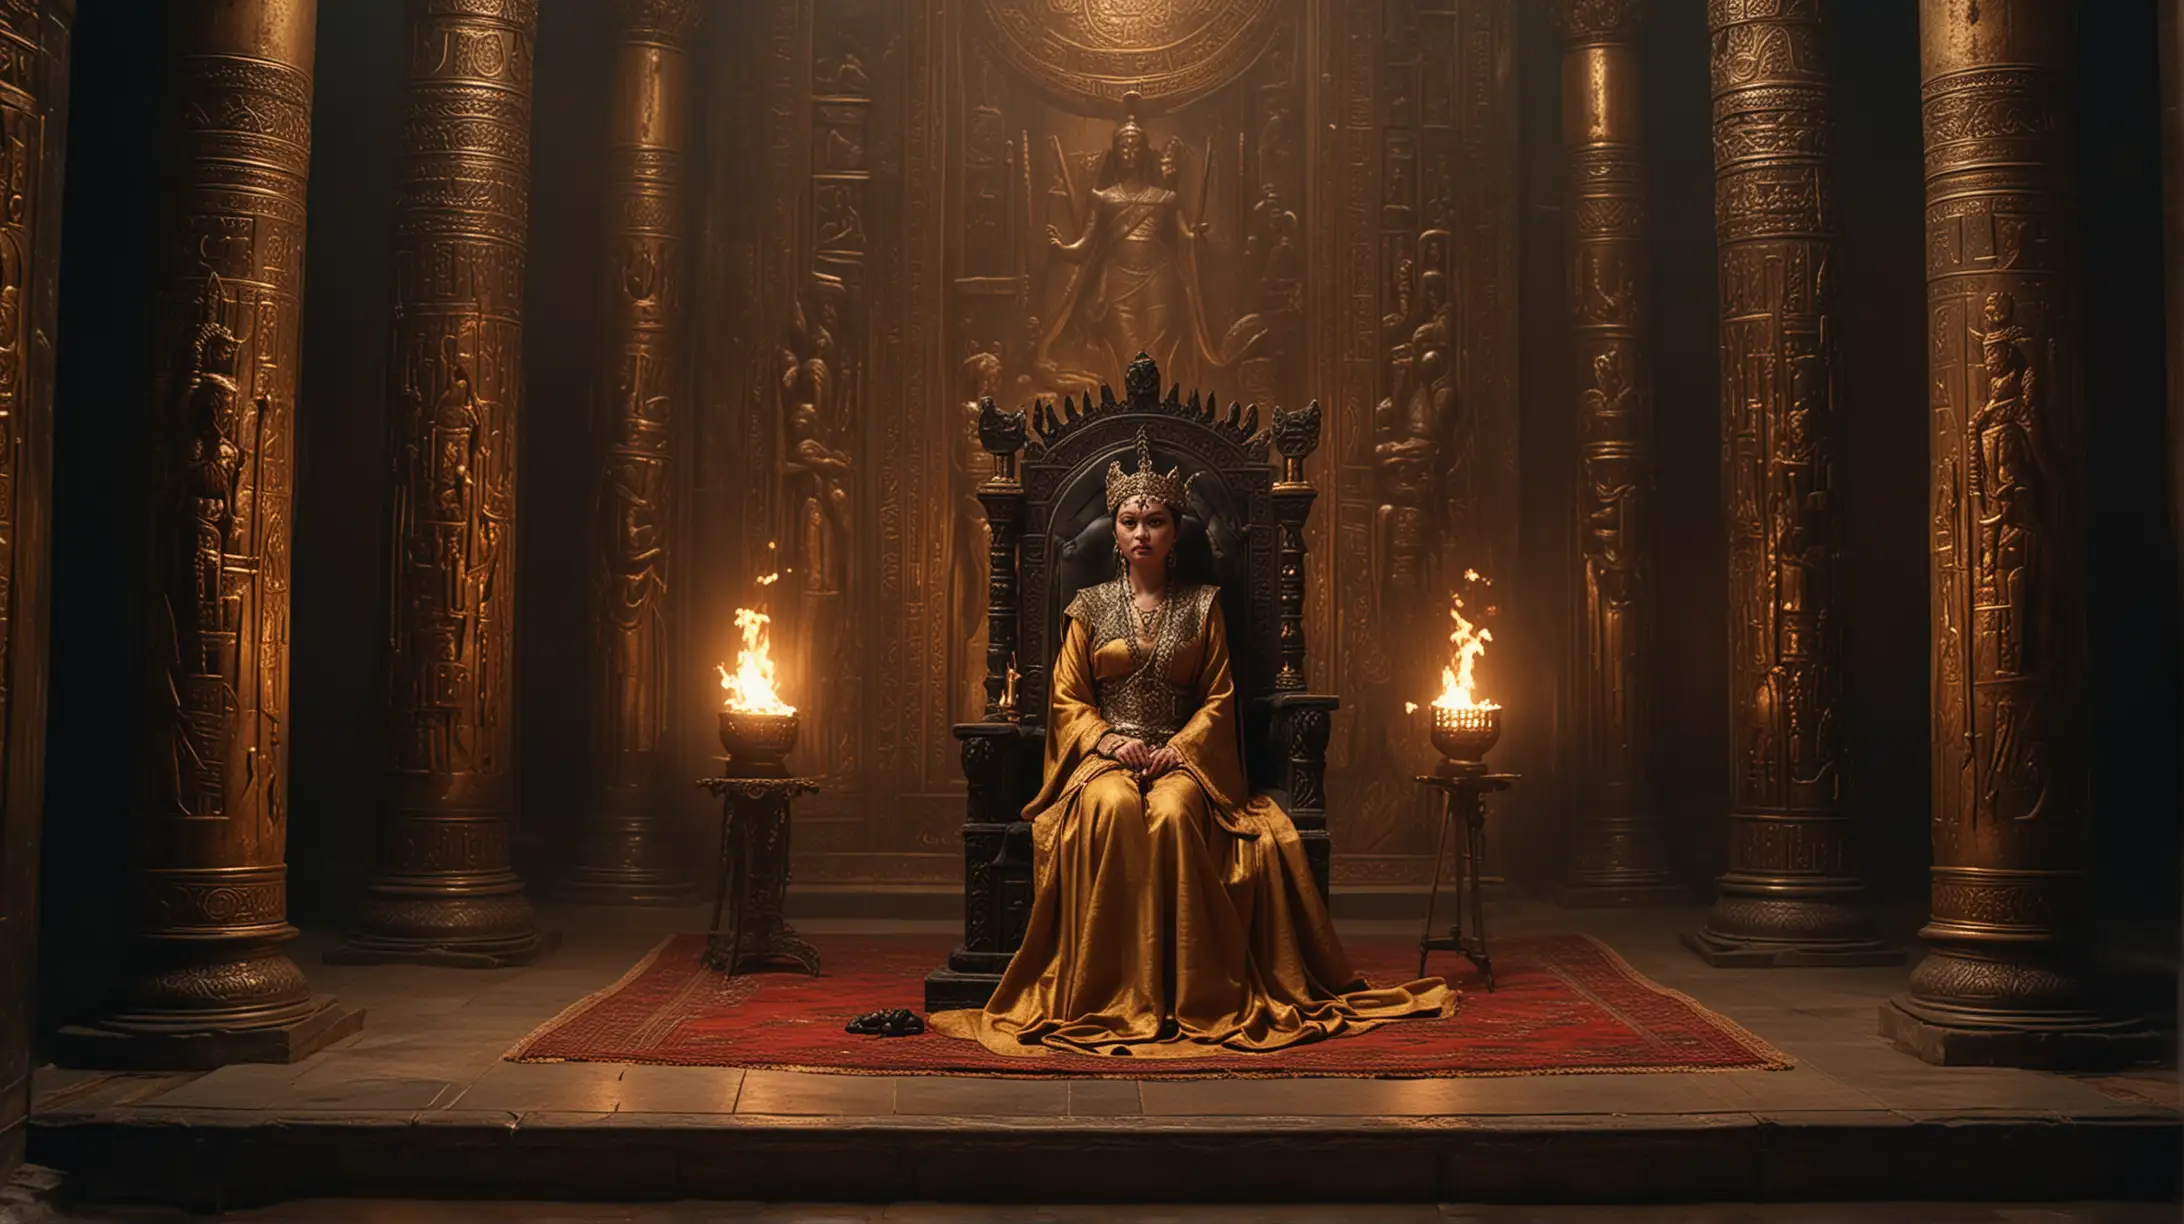 The queen of Sheba sits pensively on her throne, her high priest stand beside her a little apart, holding his long baton, all dressed in rich ancient oriental costumes, dark throne hall, torch burning on the walls, cinematic, large panoramic view